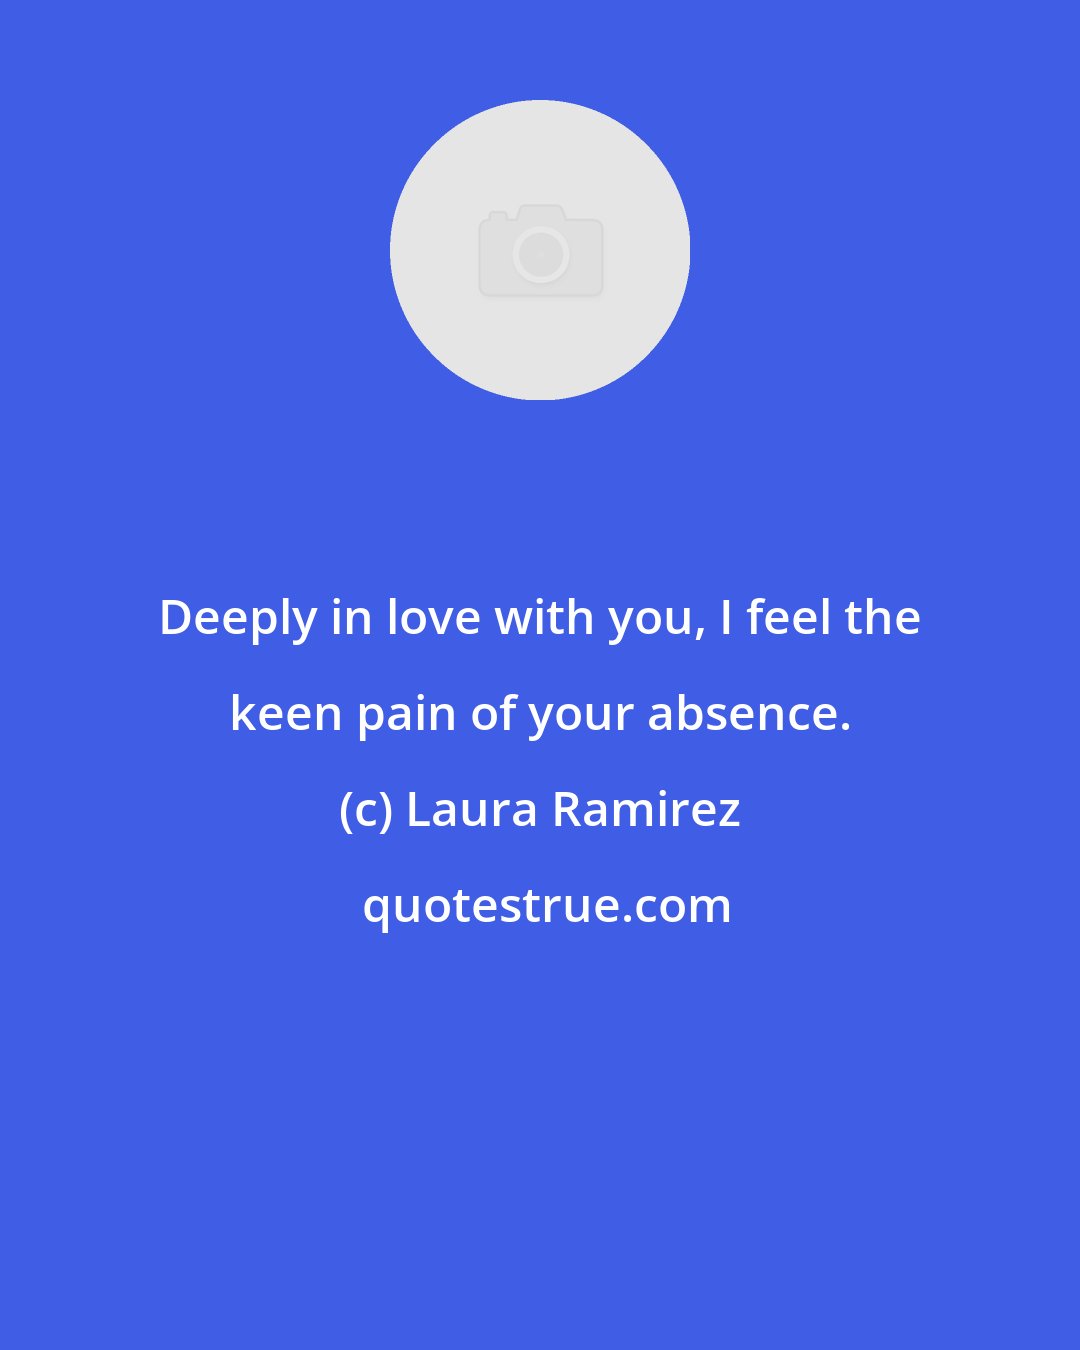 Laura Ramirez: Deeply in love with you, I feel the keen pain of your absence.